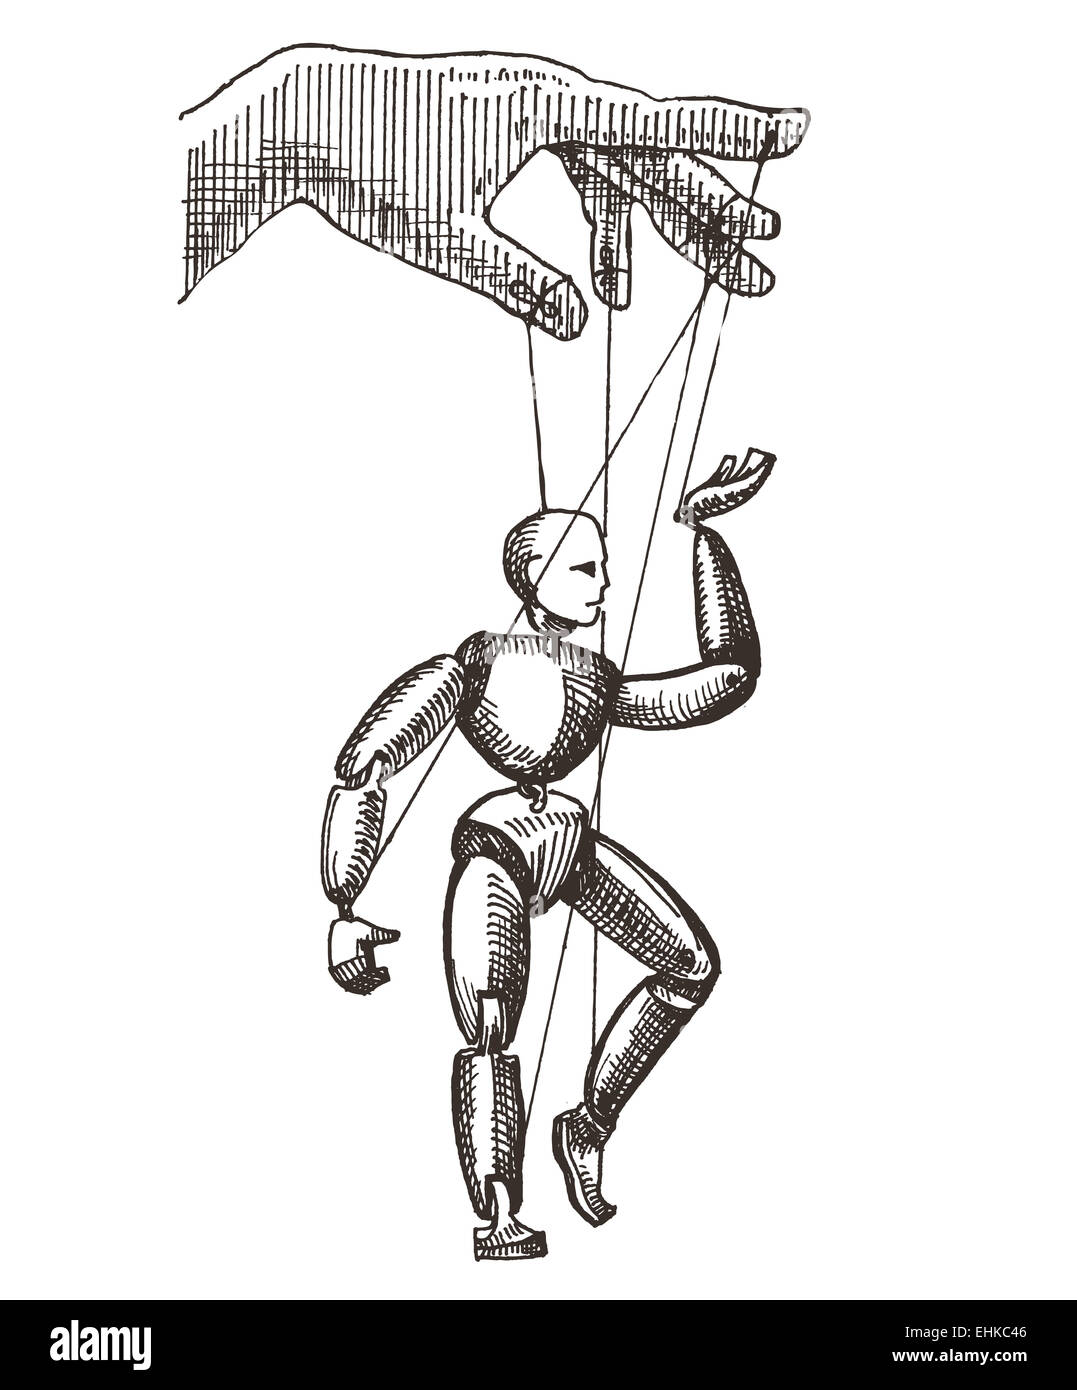 How To Draw A Marionette, Step by Step, Drawing Guide, by Dawn - DragoArt